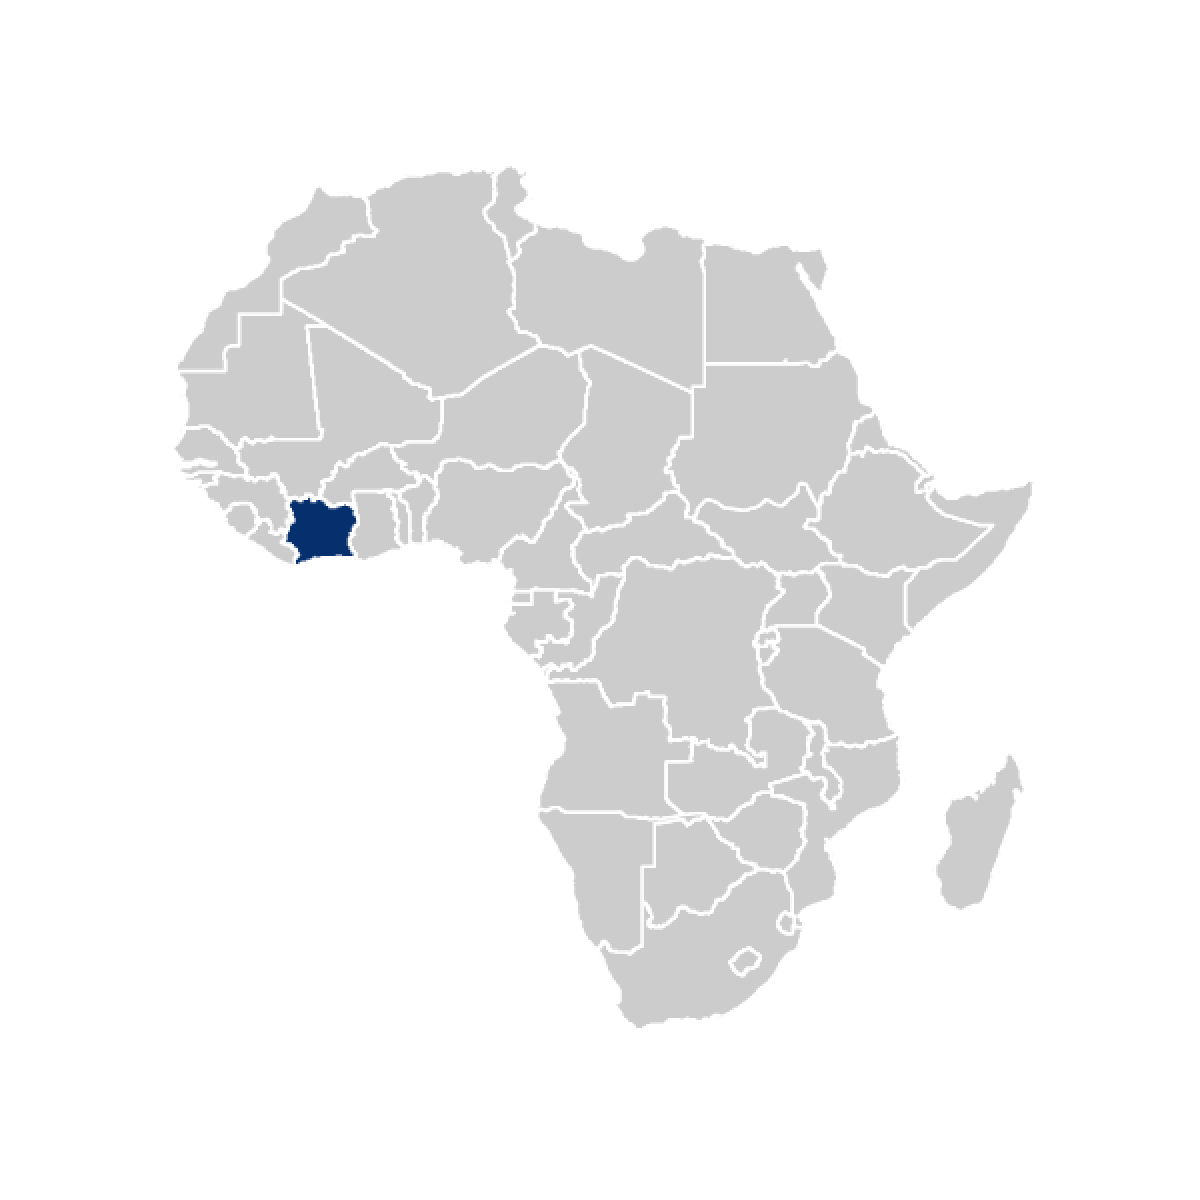 Cote D'Ivoire highlighted on map of Africa